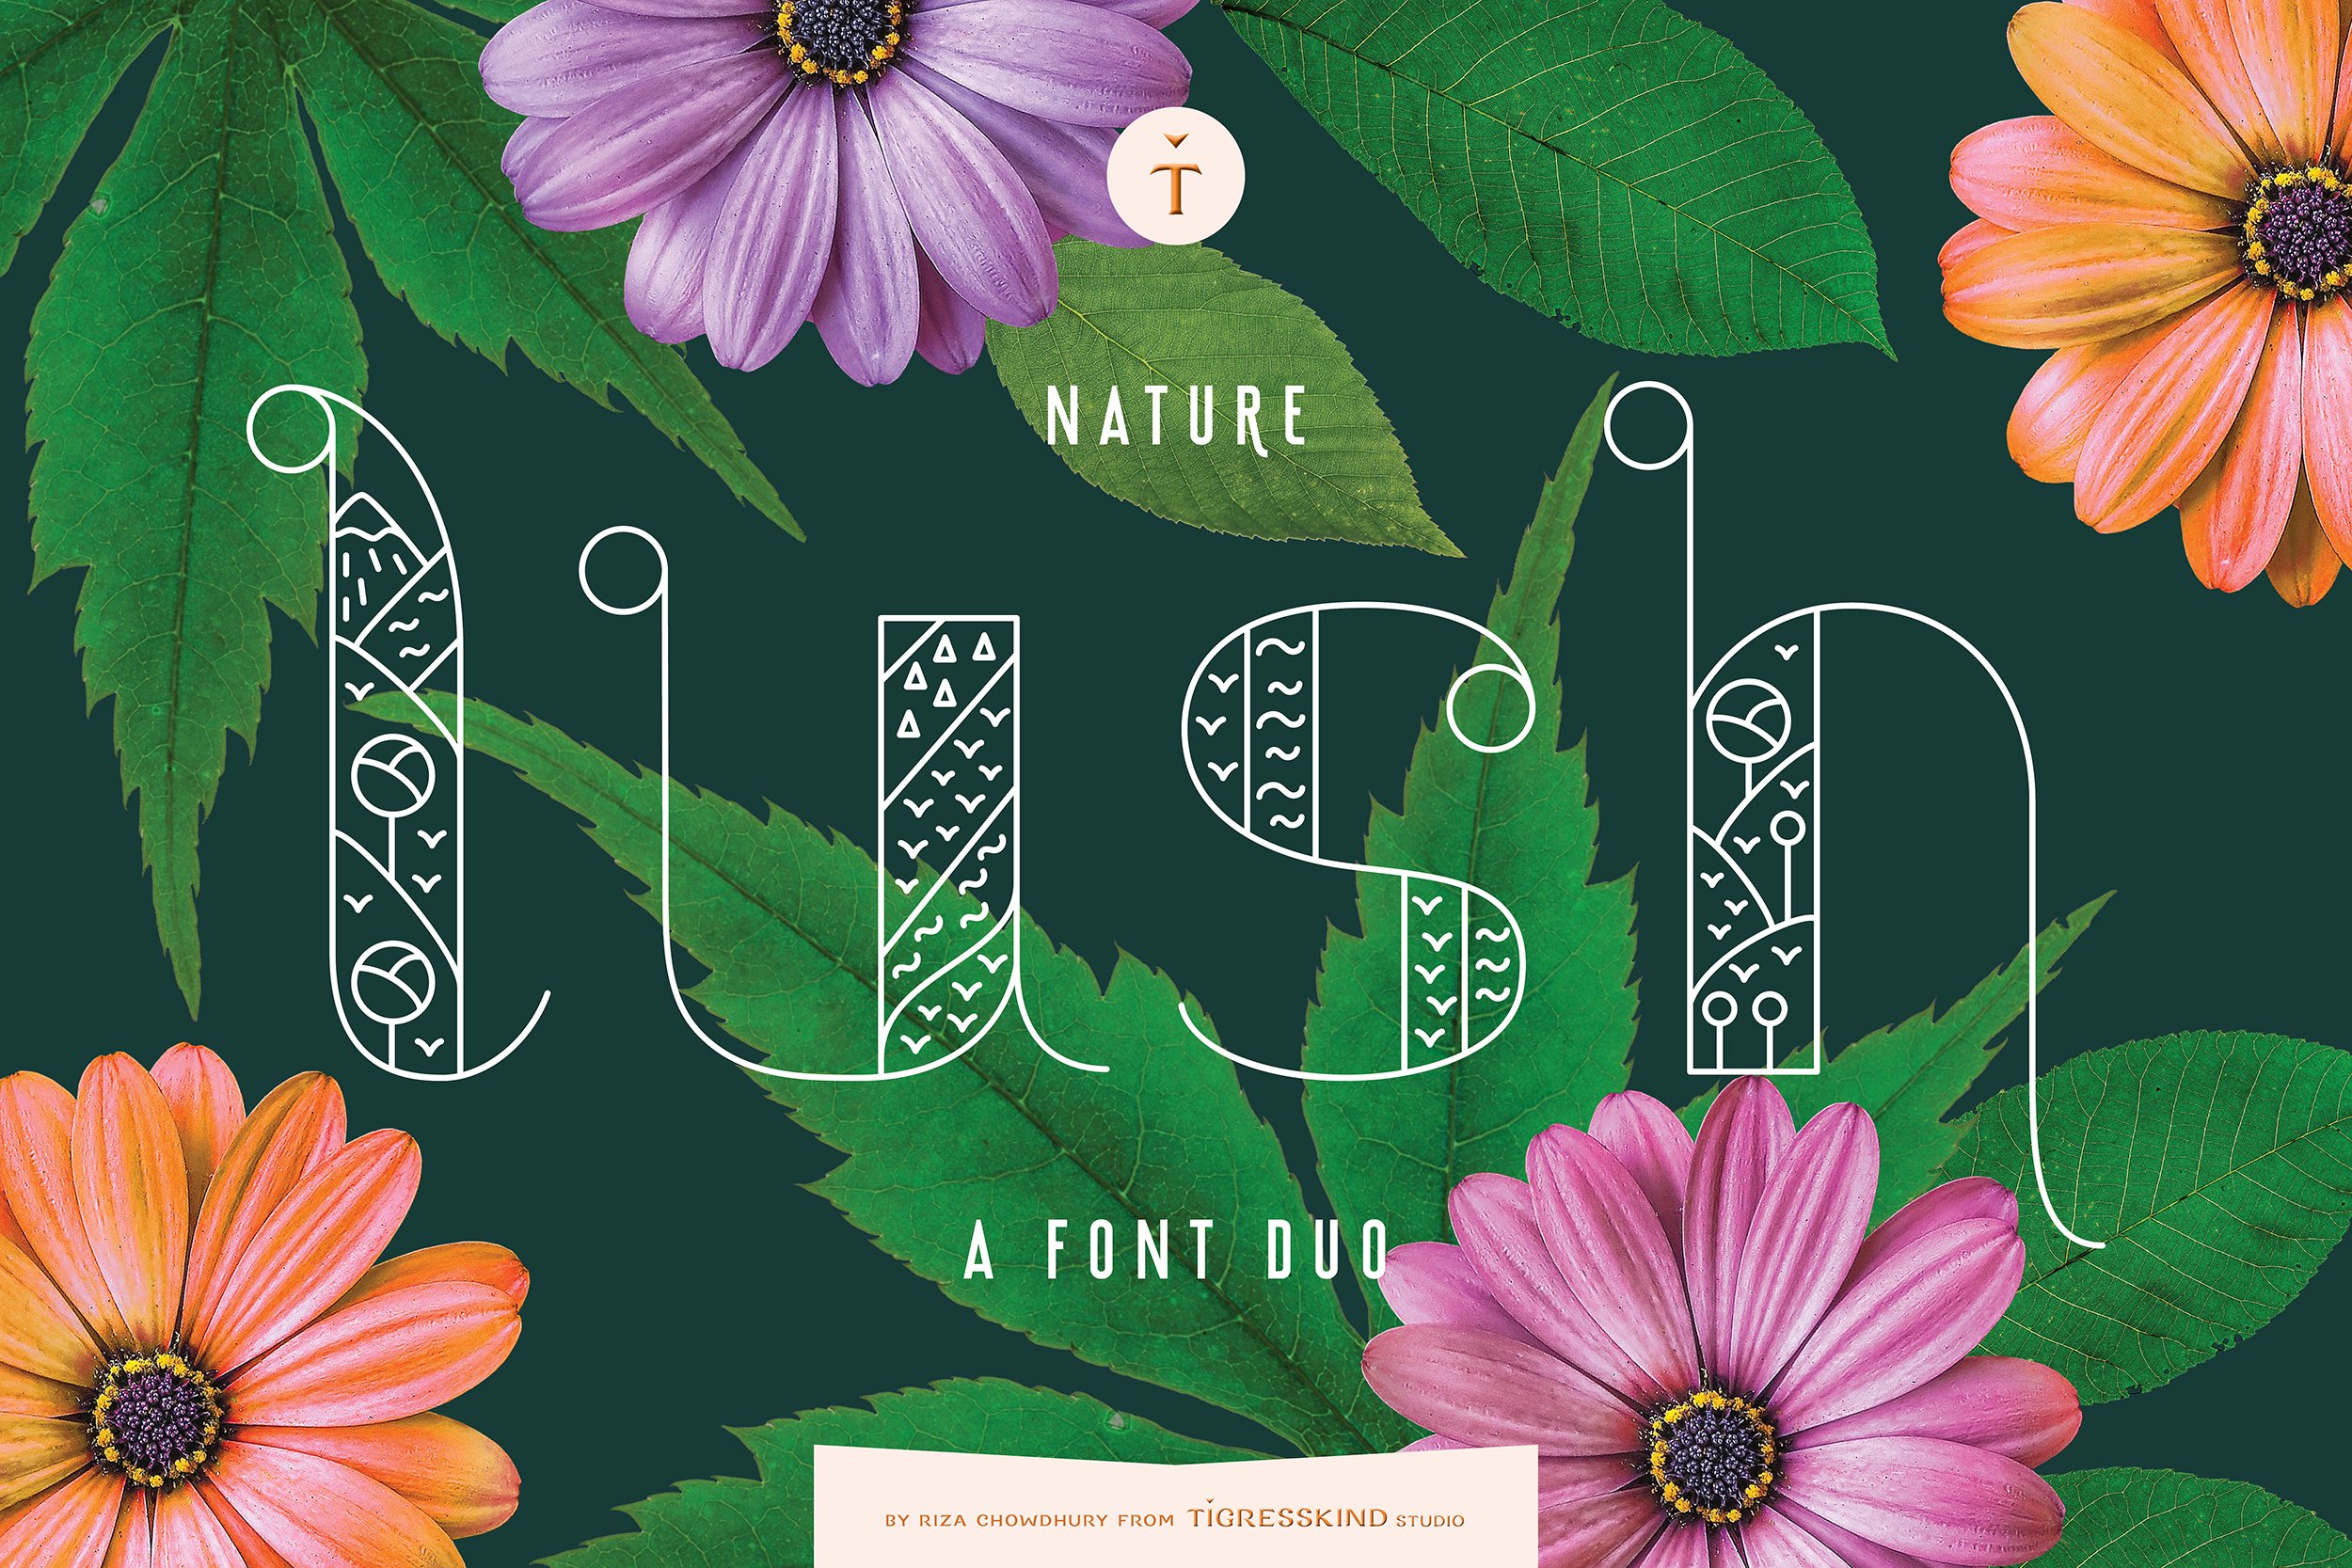 Nature Lush Font Duo cover image.